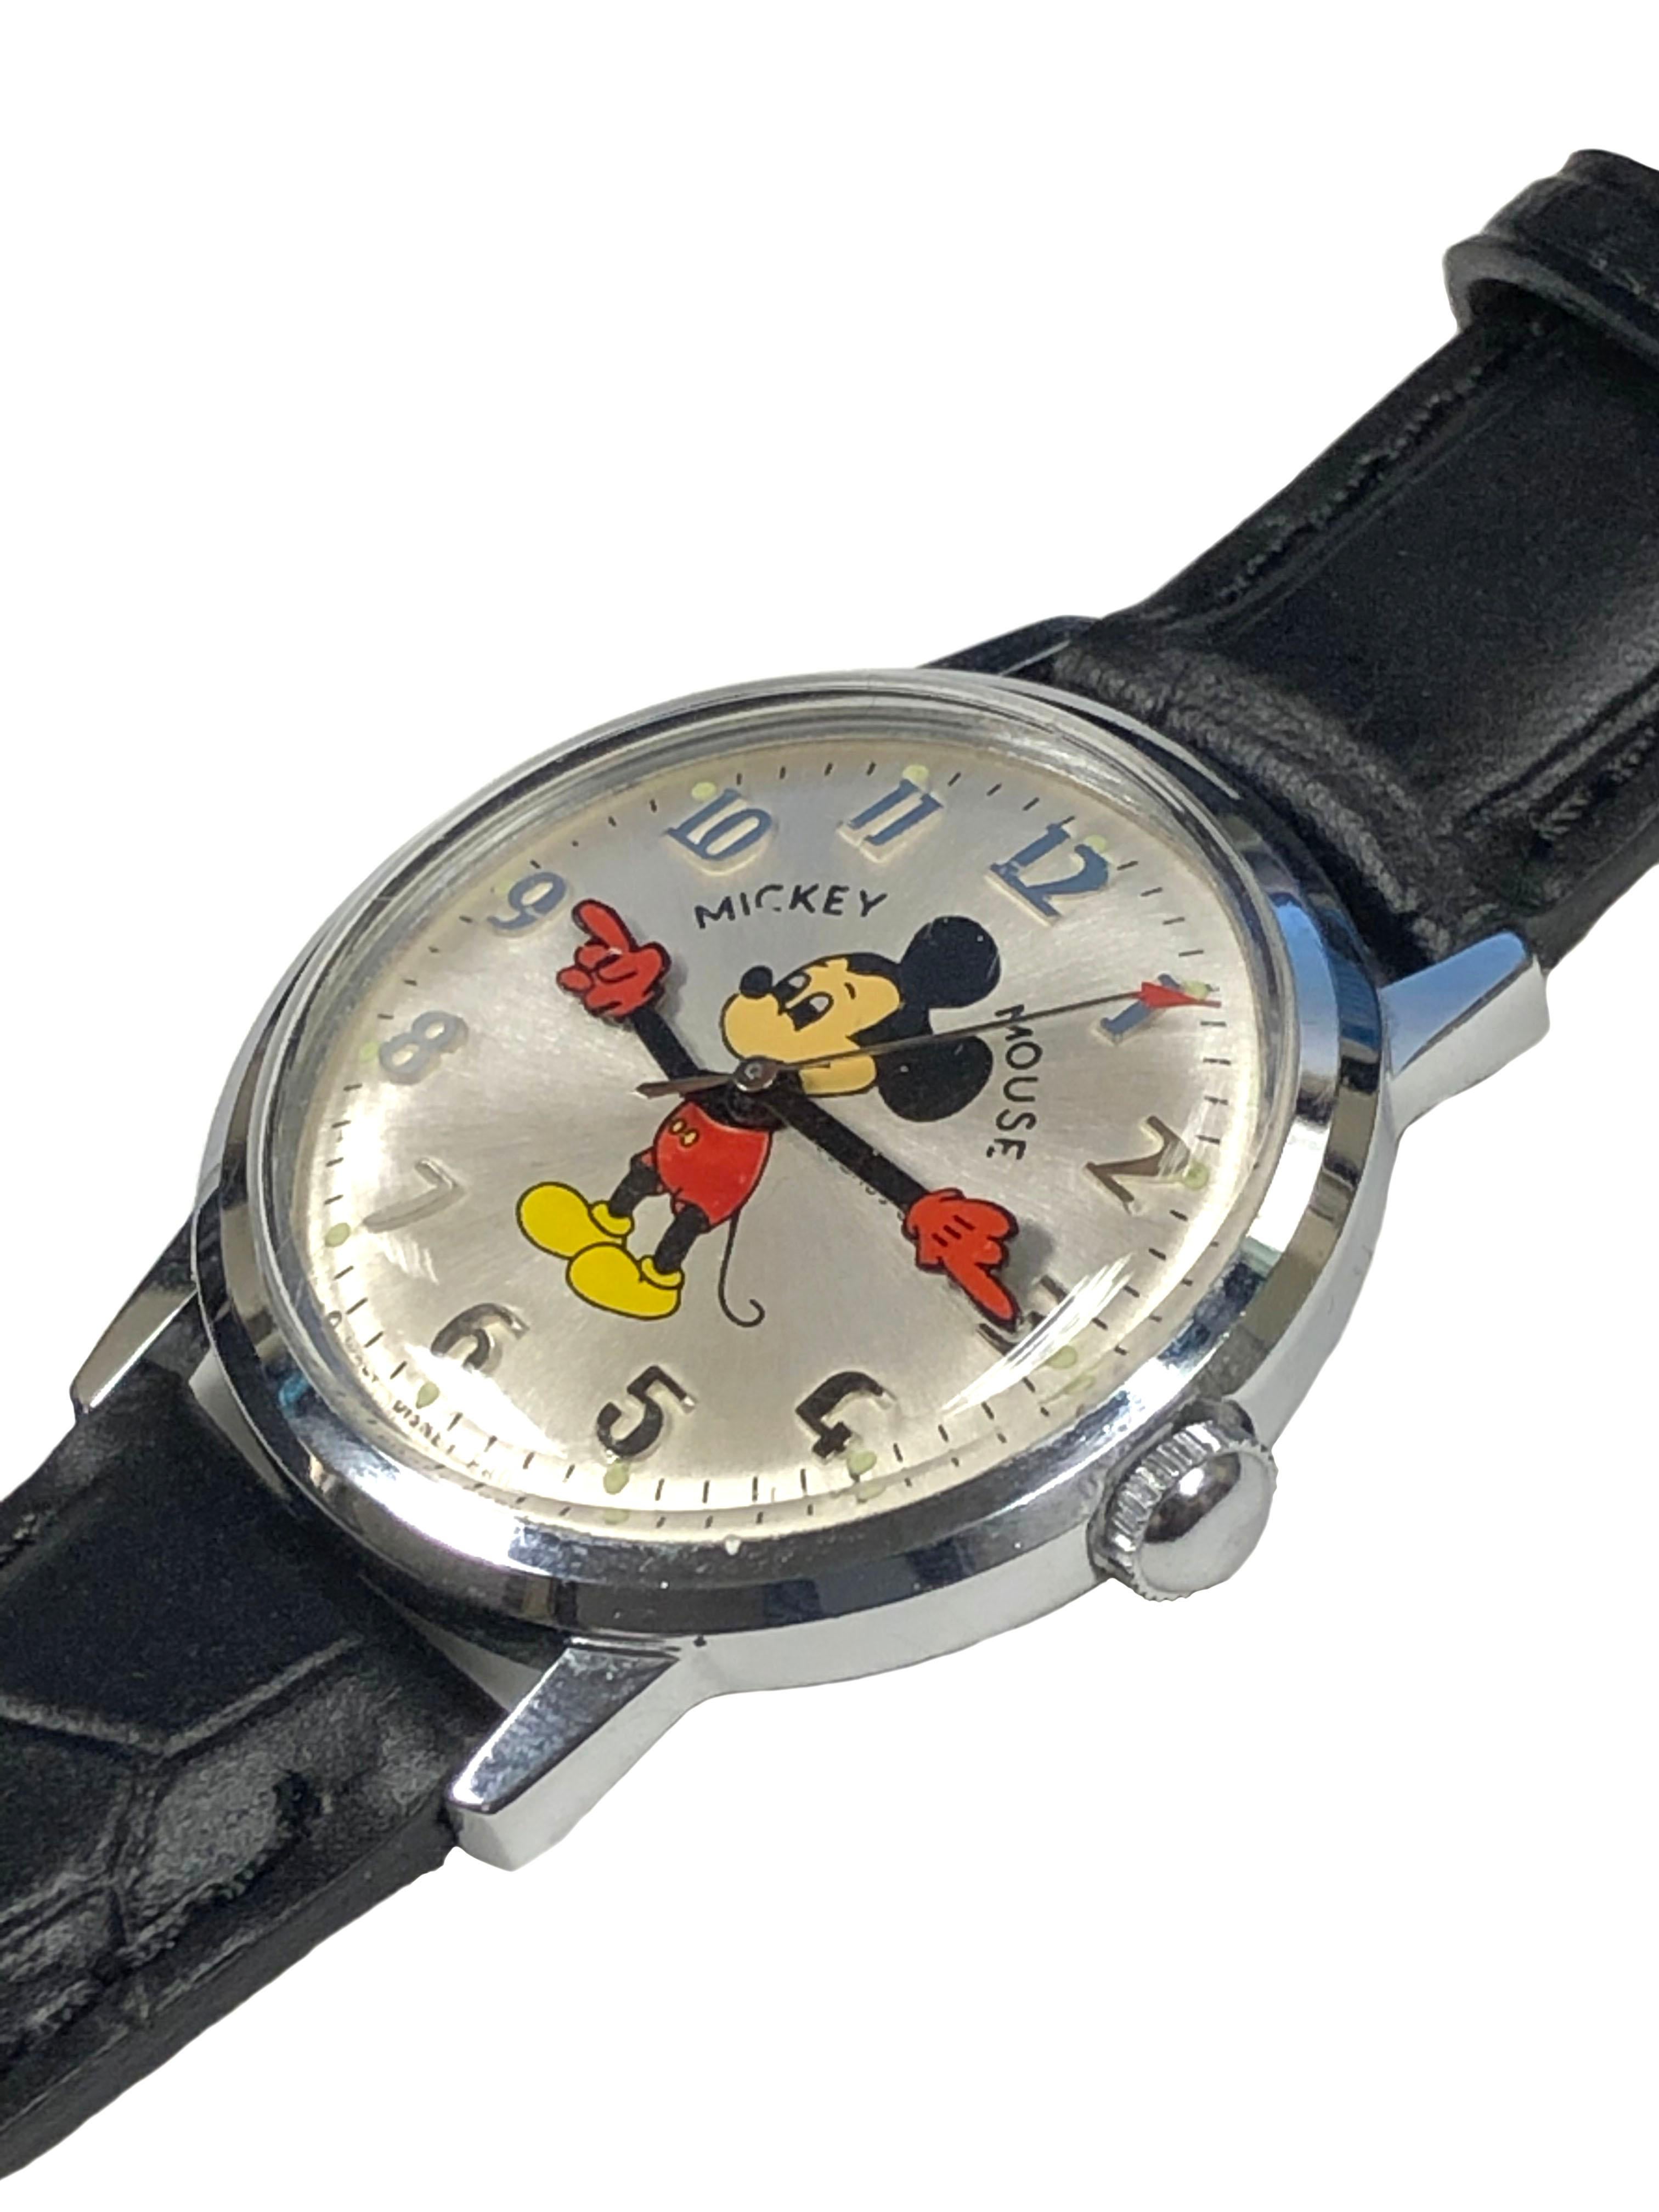 Circa 1970s Mickey Mouse Wrist Watch by Helbros, 34 M.M. Stainless Steel 2 Piece Water resistant case, 17 Jewel, Mechanical Manual wind movement. Bright Silver Dial with Raised Arabic Numeral Markers, sweep seconds Hand and animated Mickey Hands.